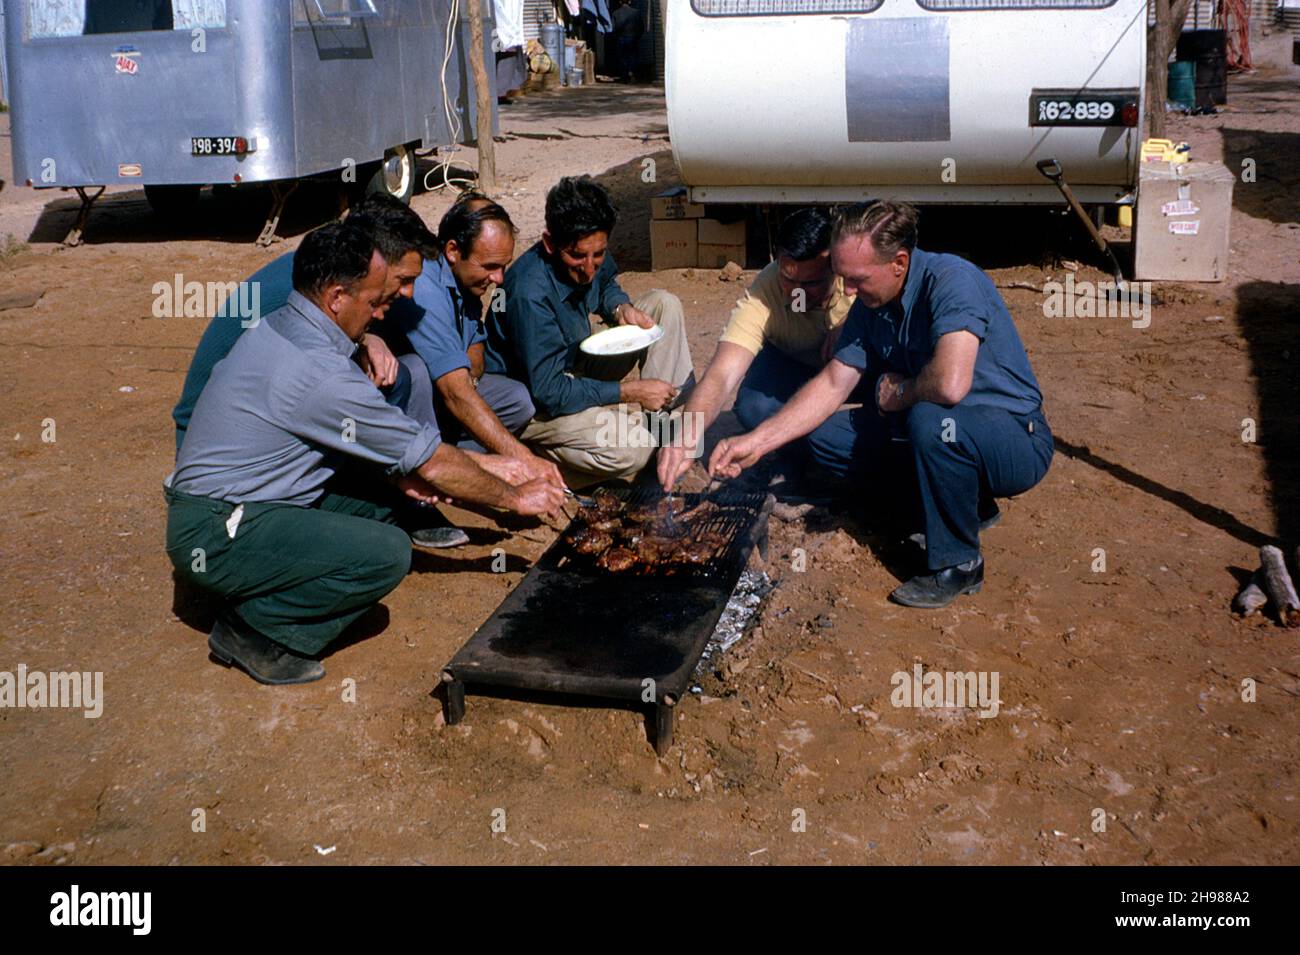 Bluebird CN7 support team barbequeing at Lake Eyre, Australia, 1964. Stock Photo